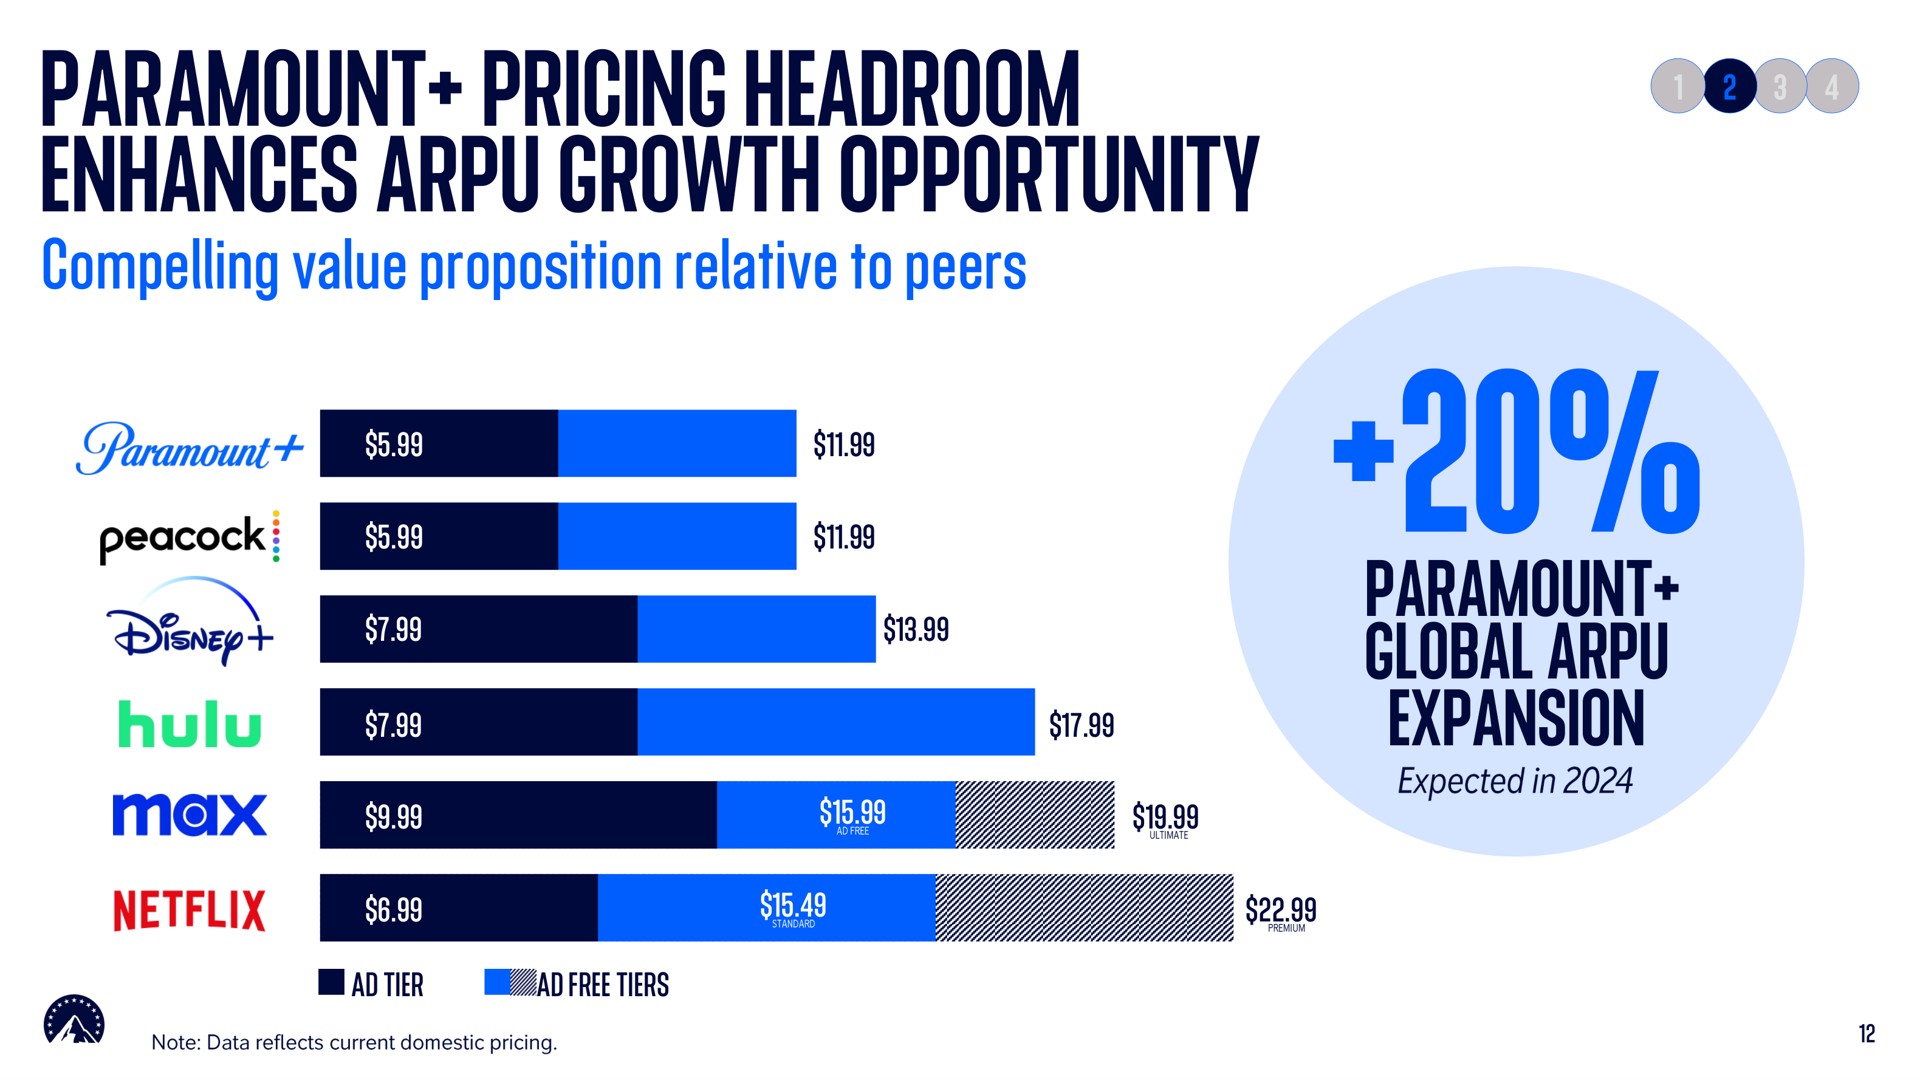 paramount pricing headroom enhances growth opportunity i a expansion | Paramount